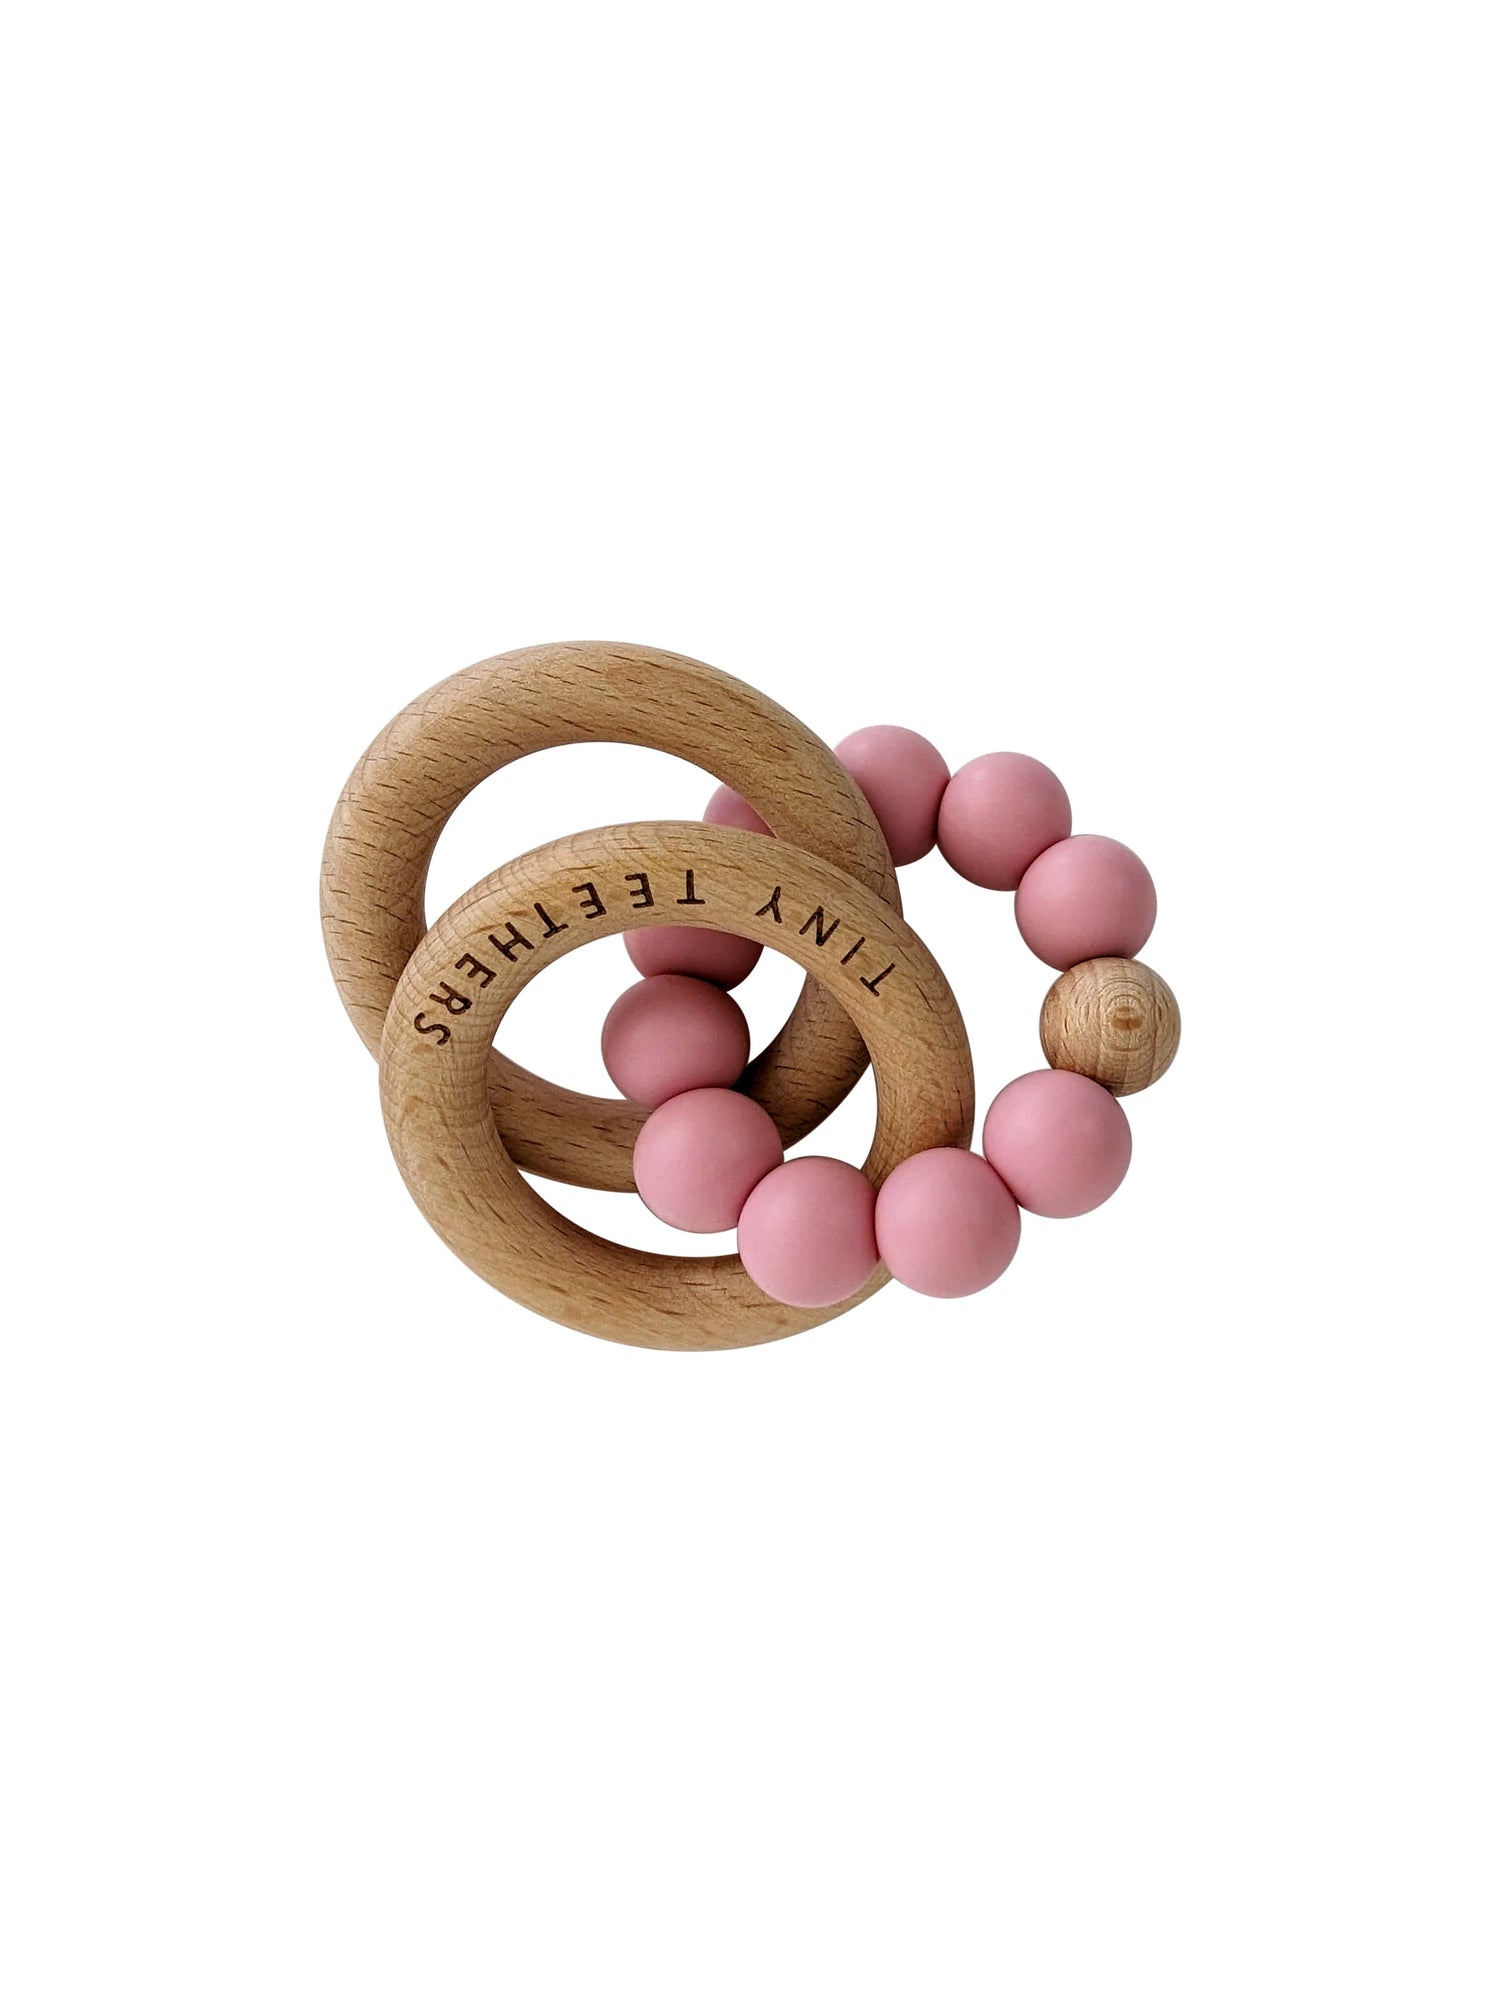 Rose Rattle Teether Rings